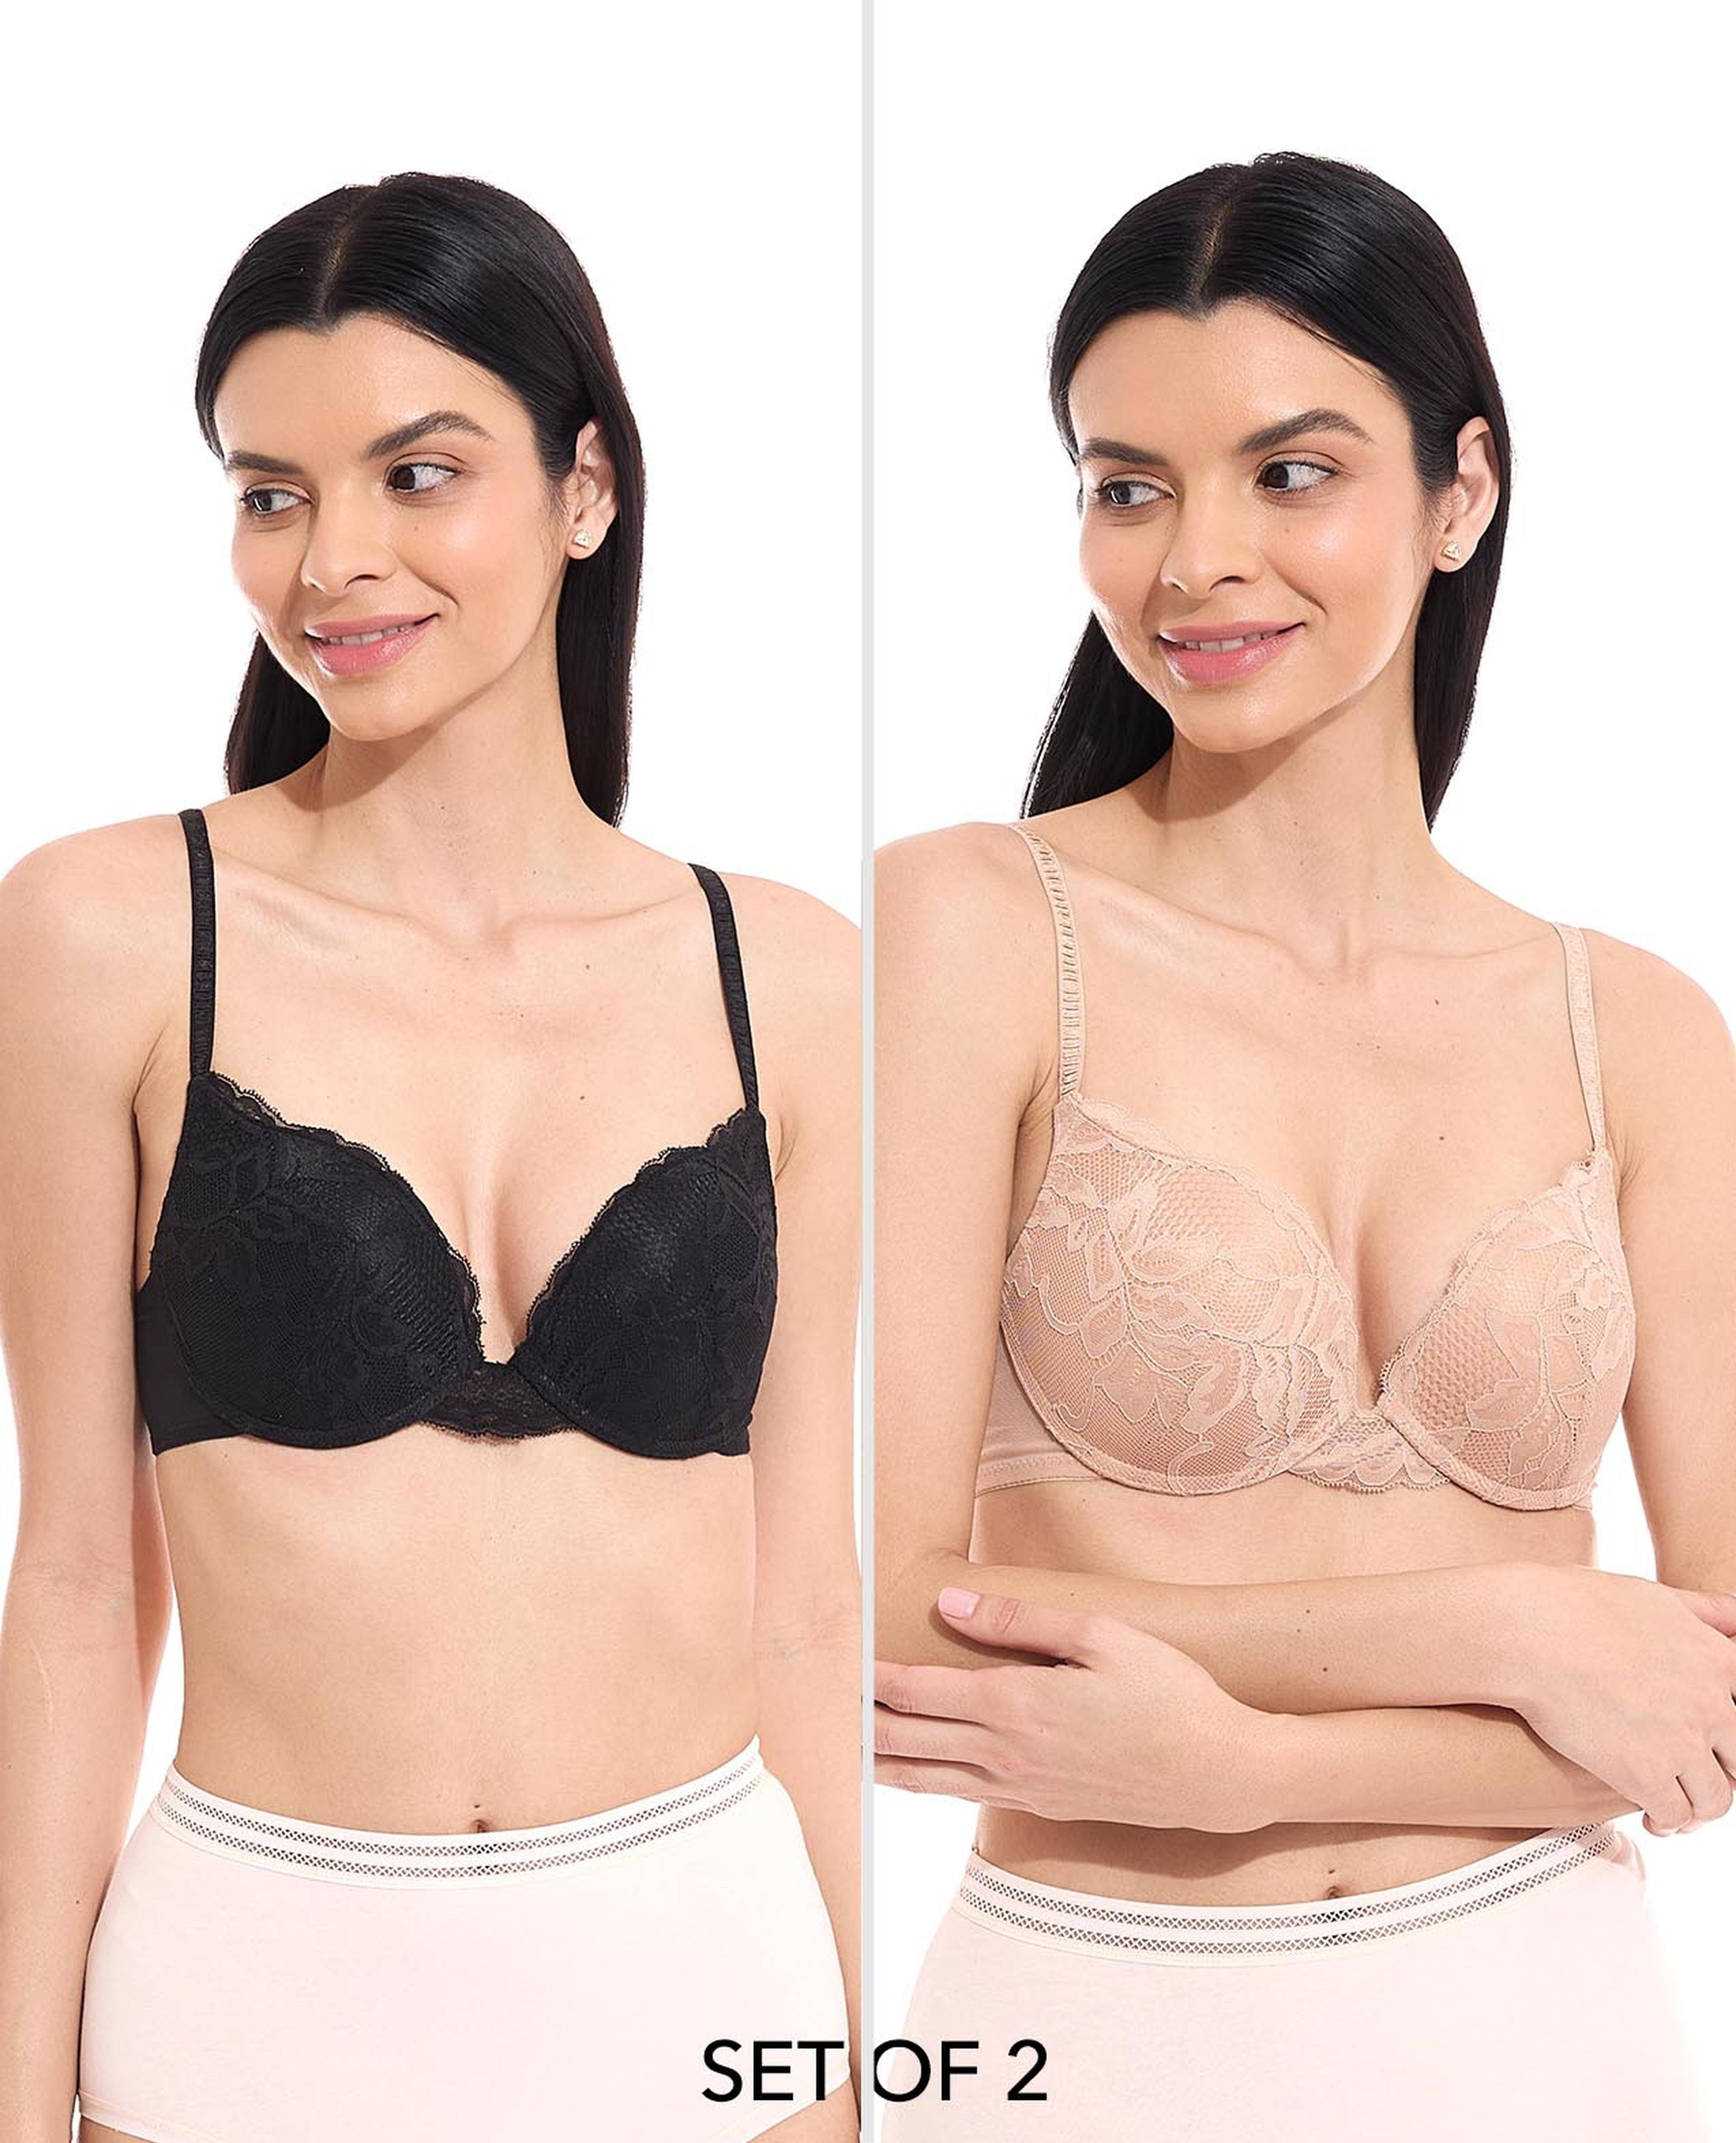 2 Pack Bebe Lace Bras | Converts to Strapless